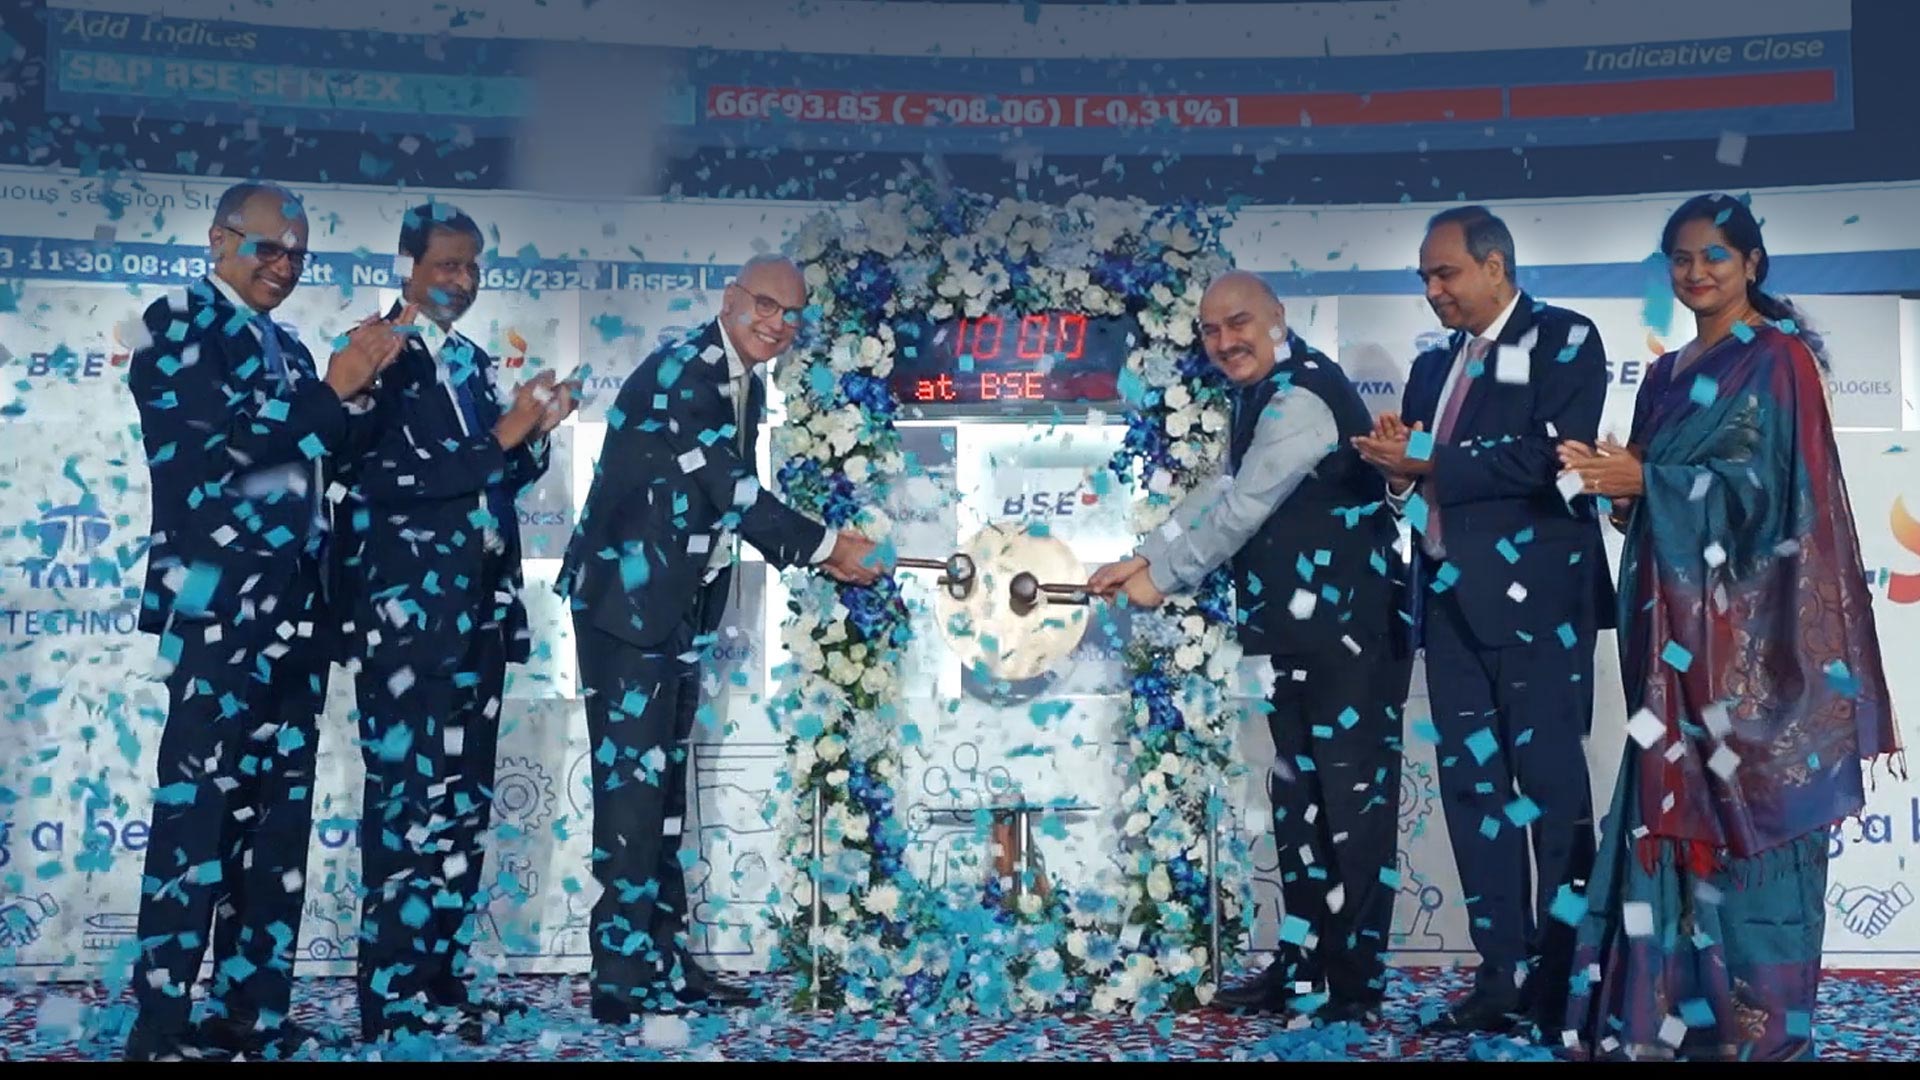 A video and picture depicting various employees and the stage setting for the Tata Technologies IPO